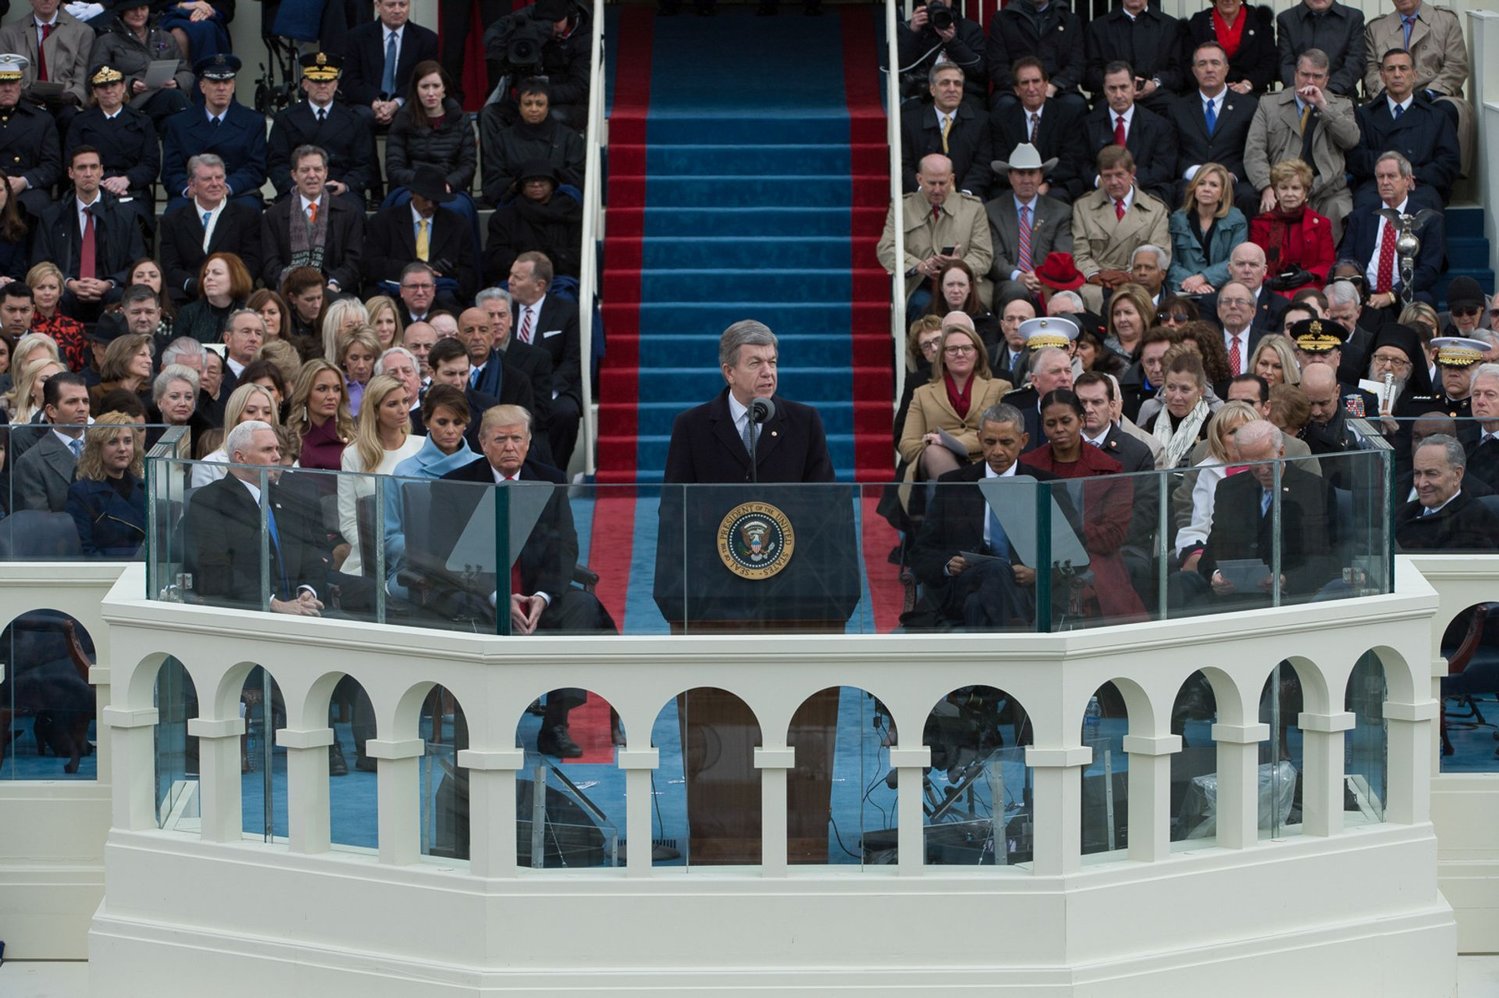 Blunt served as master of ceremonies for two inaugurations, including President Donald Trump's in 2017 (pictured) and President Joe Biden's in 2021.